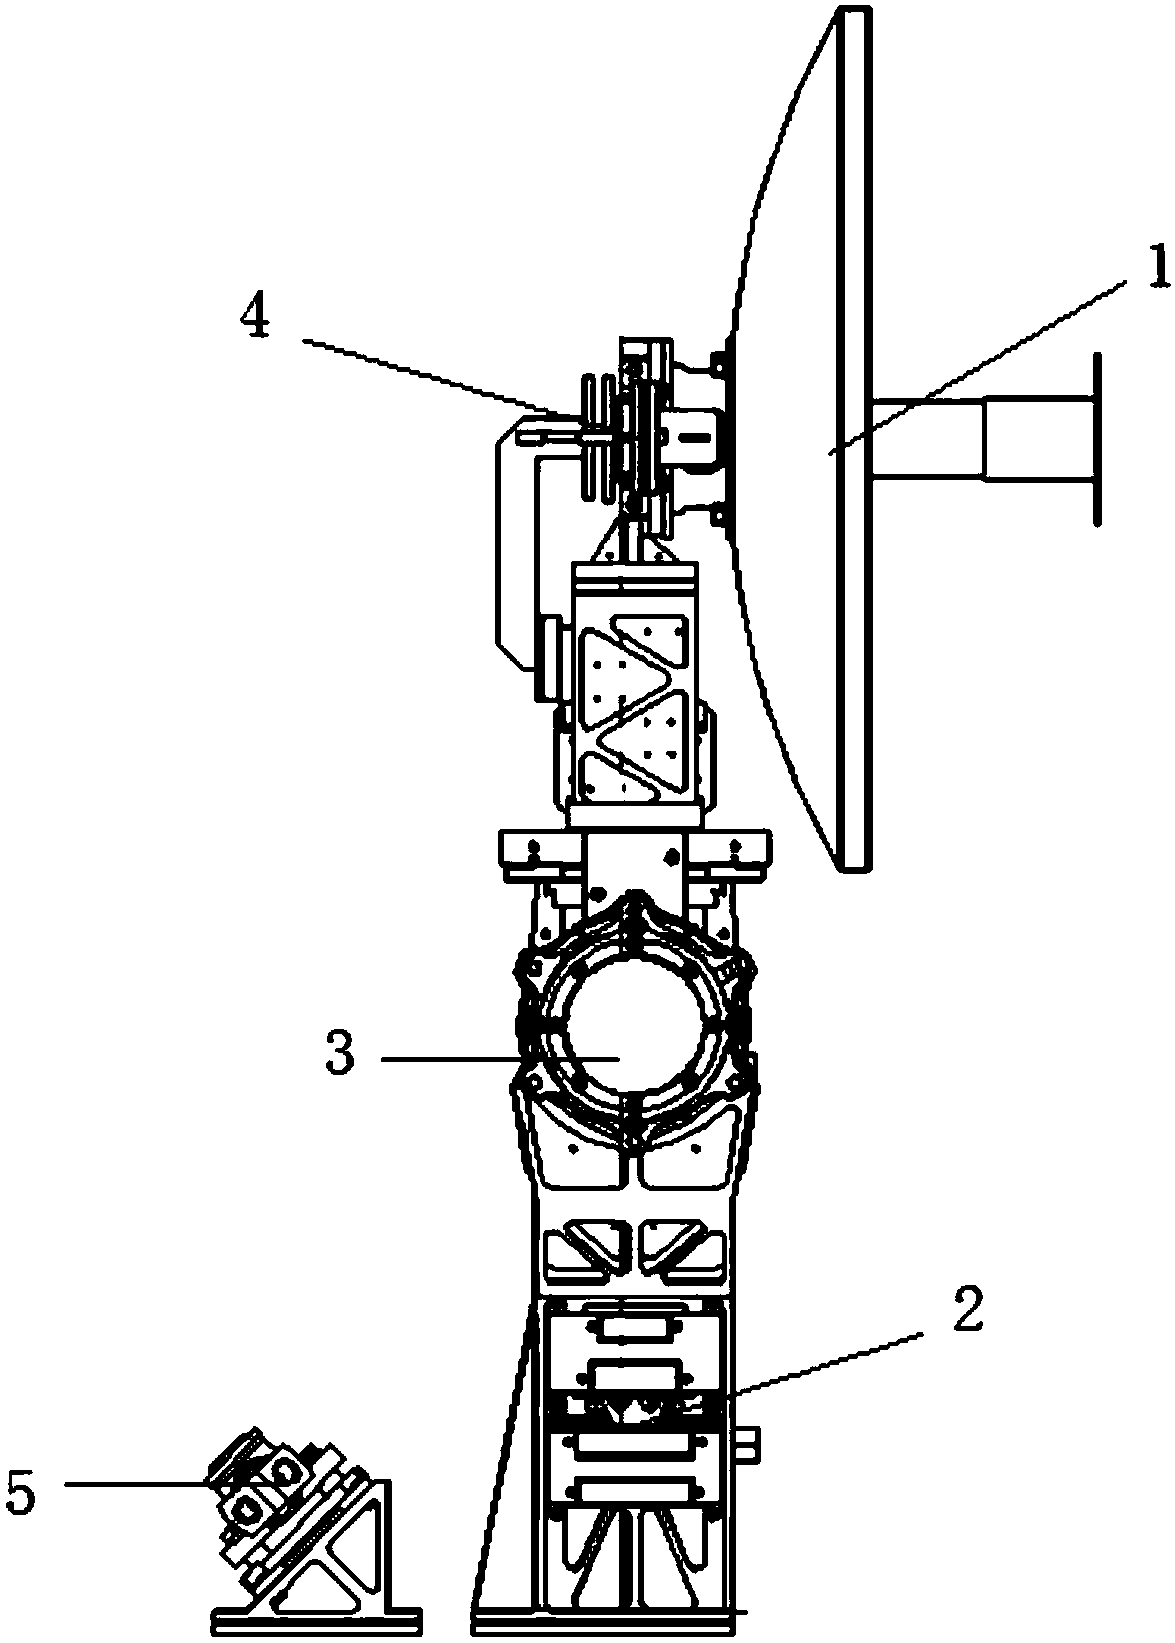 Folding type directional antenna device for satellite